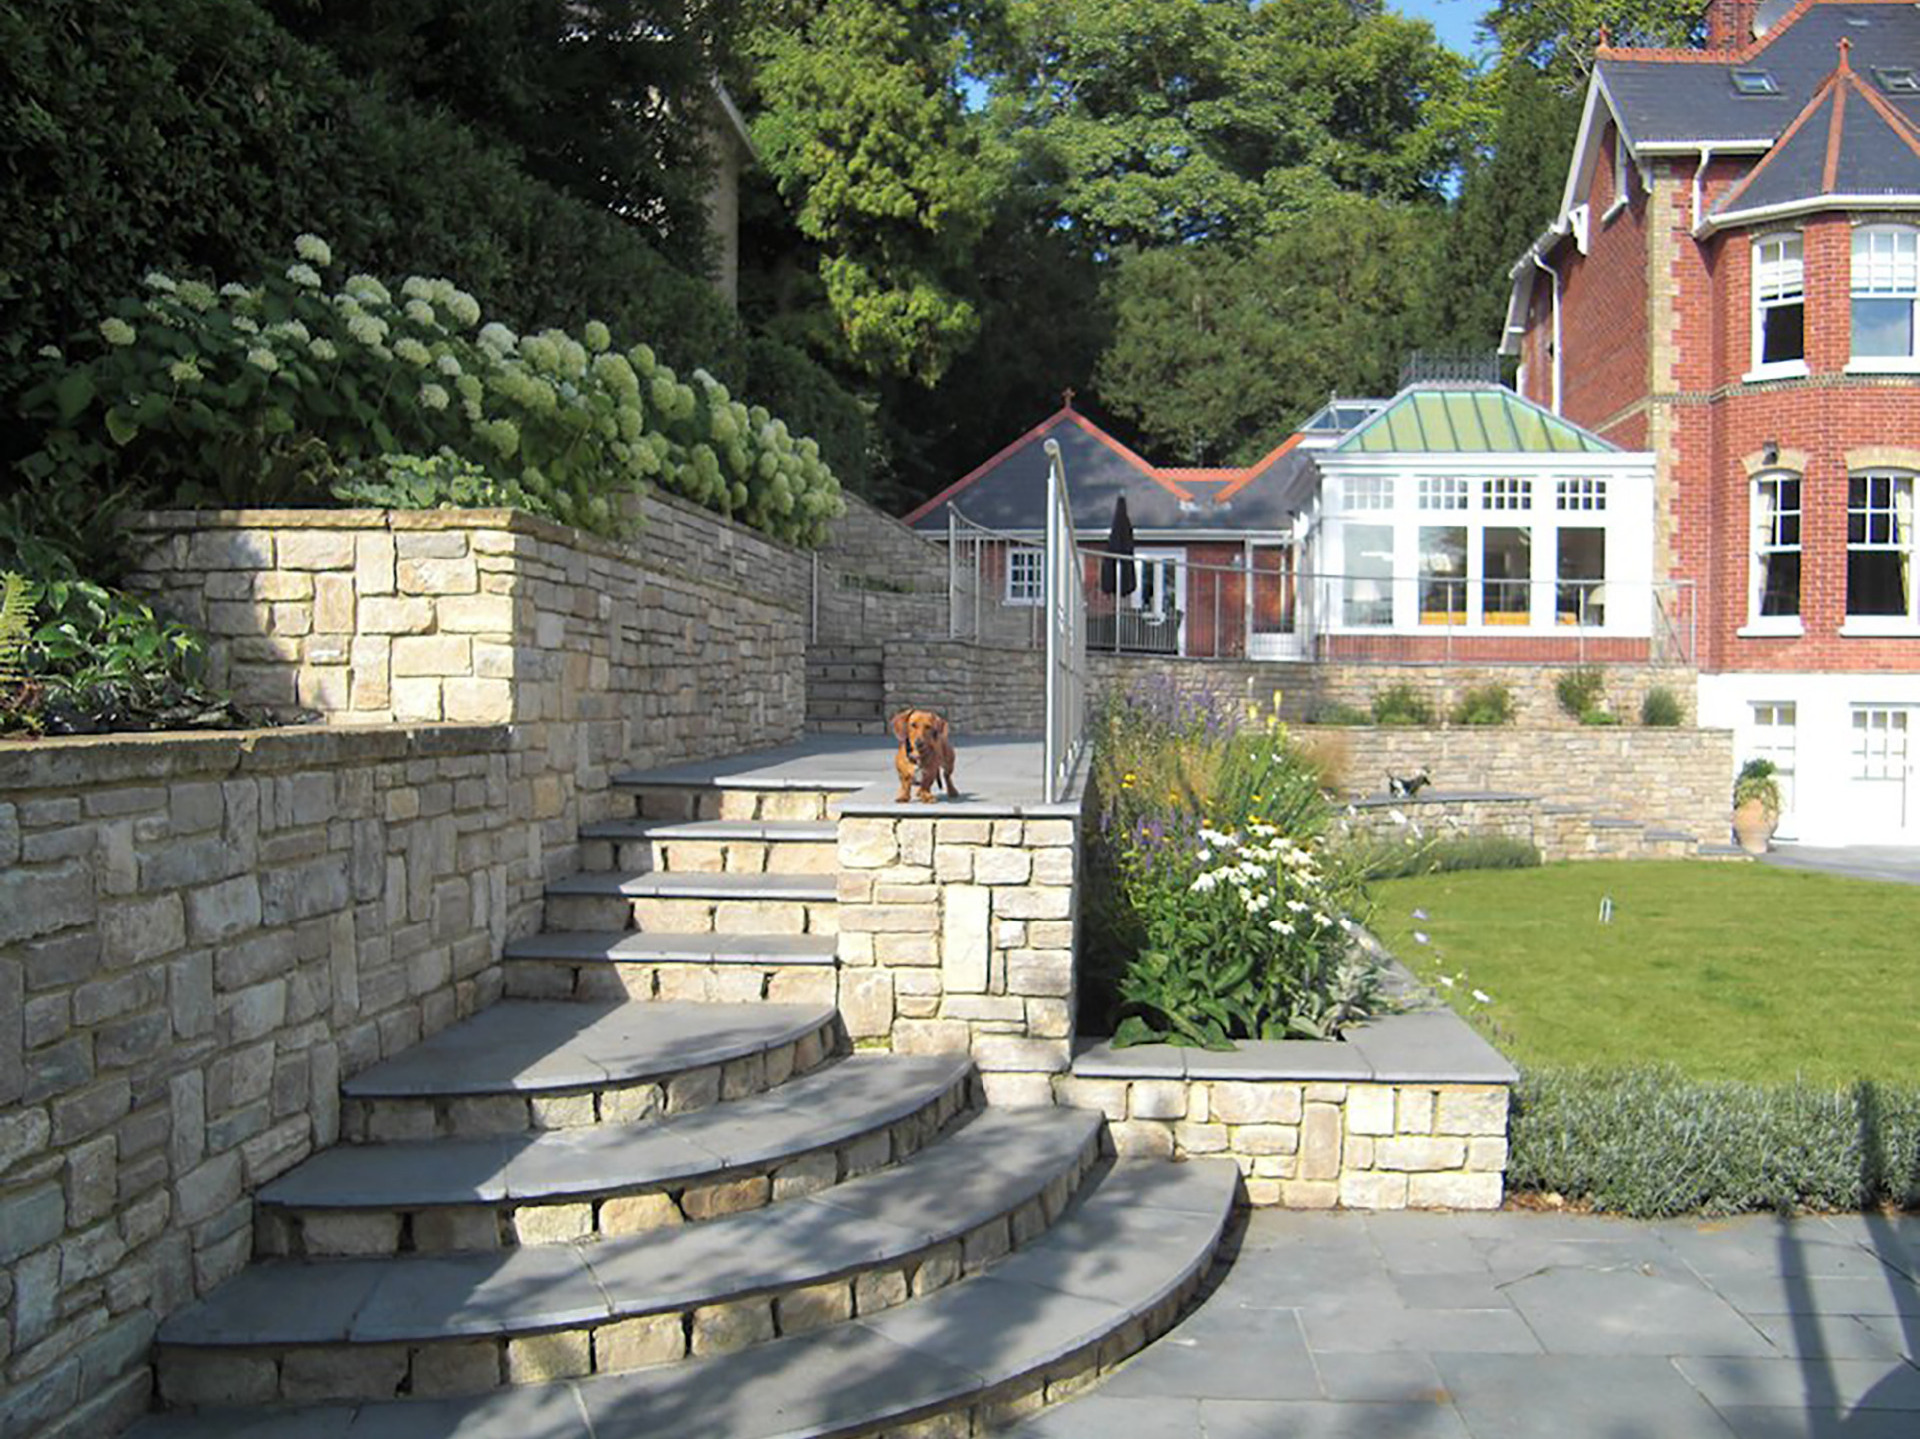 Large sloping garden design in Kenley, Surrey with stone faced retaining walls, semi-circular steps, and stainless steel railings.